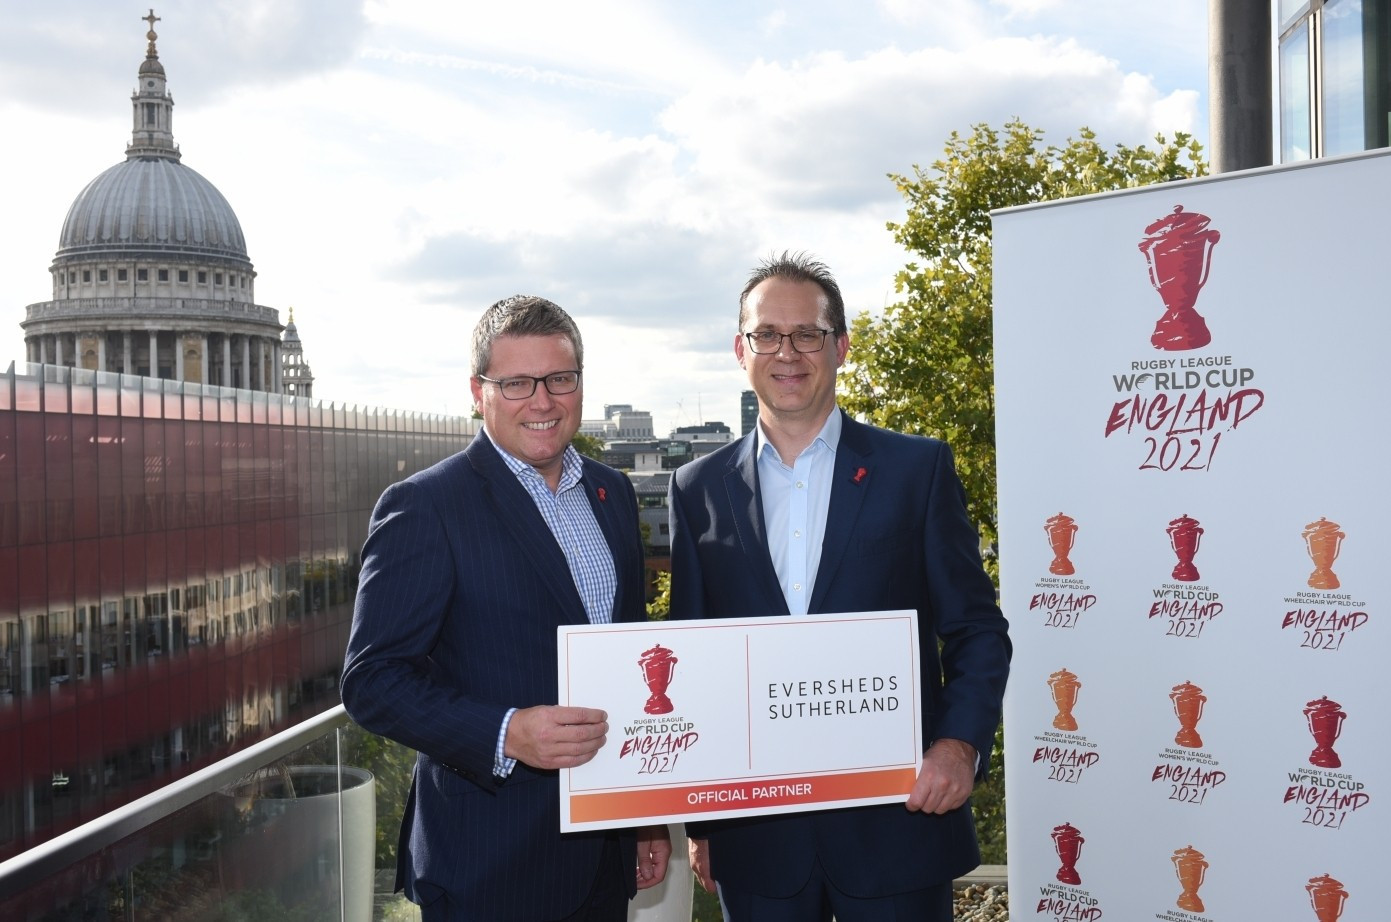 Eversheds Sutherland have signed up as the first official partner of the 2021 Rugby League World Cup in England ©RFL